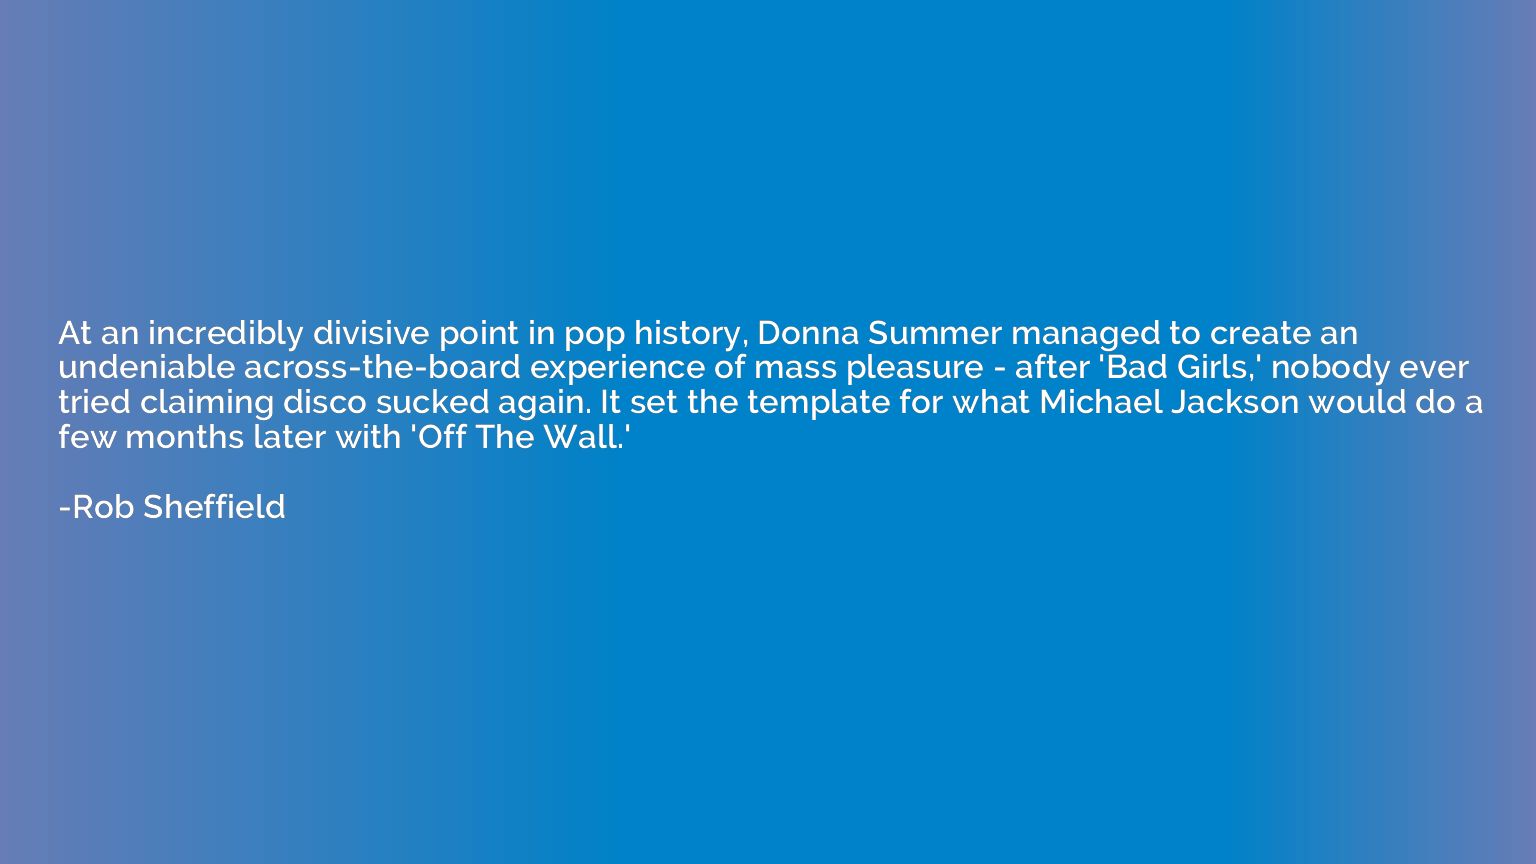 At an incredibly divisive point in pop history, Donna Summer